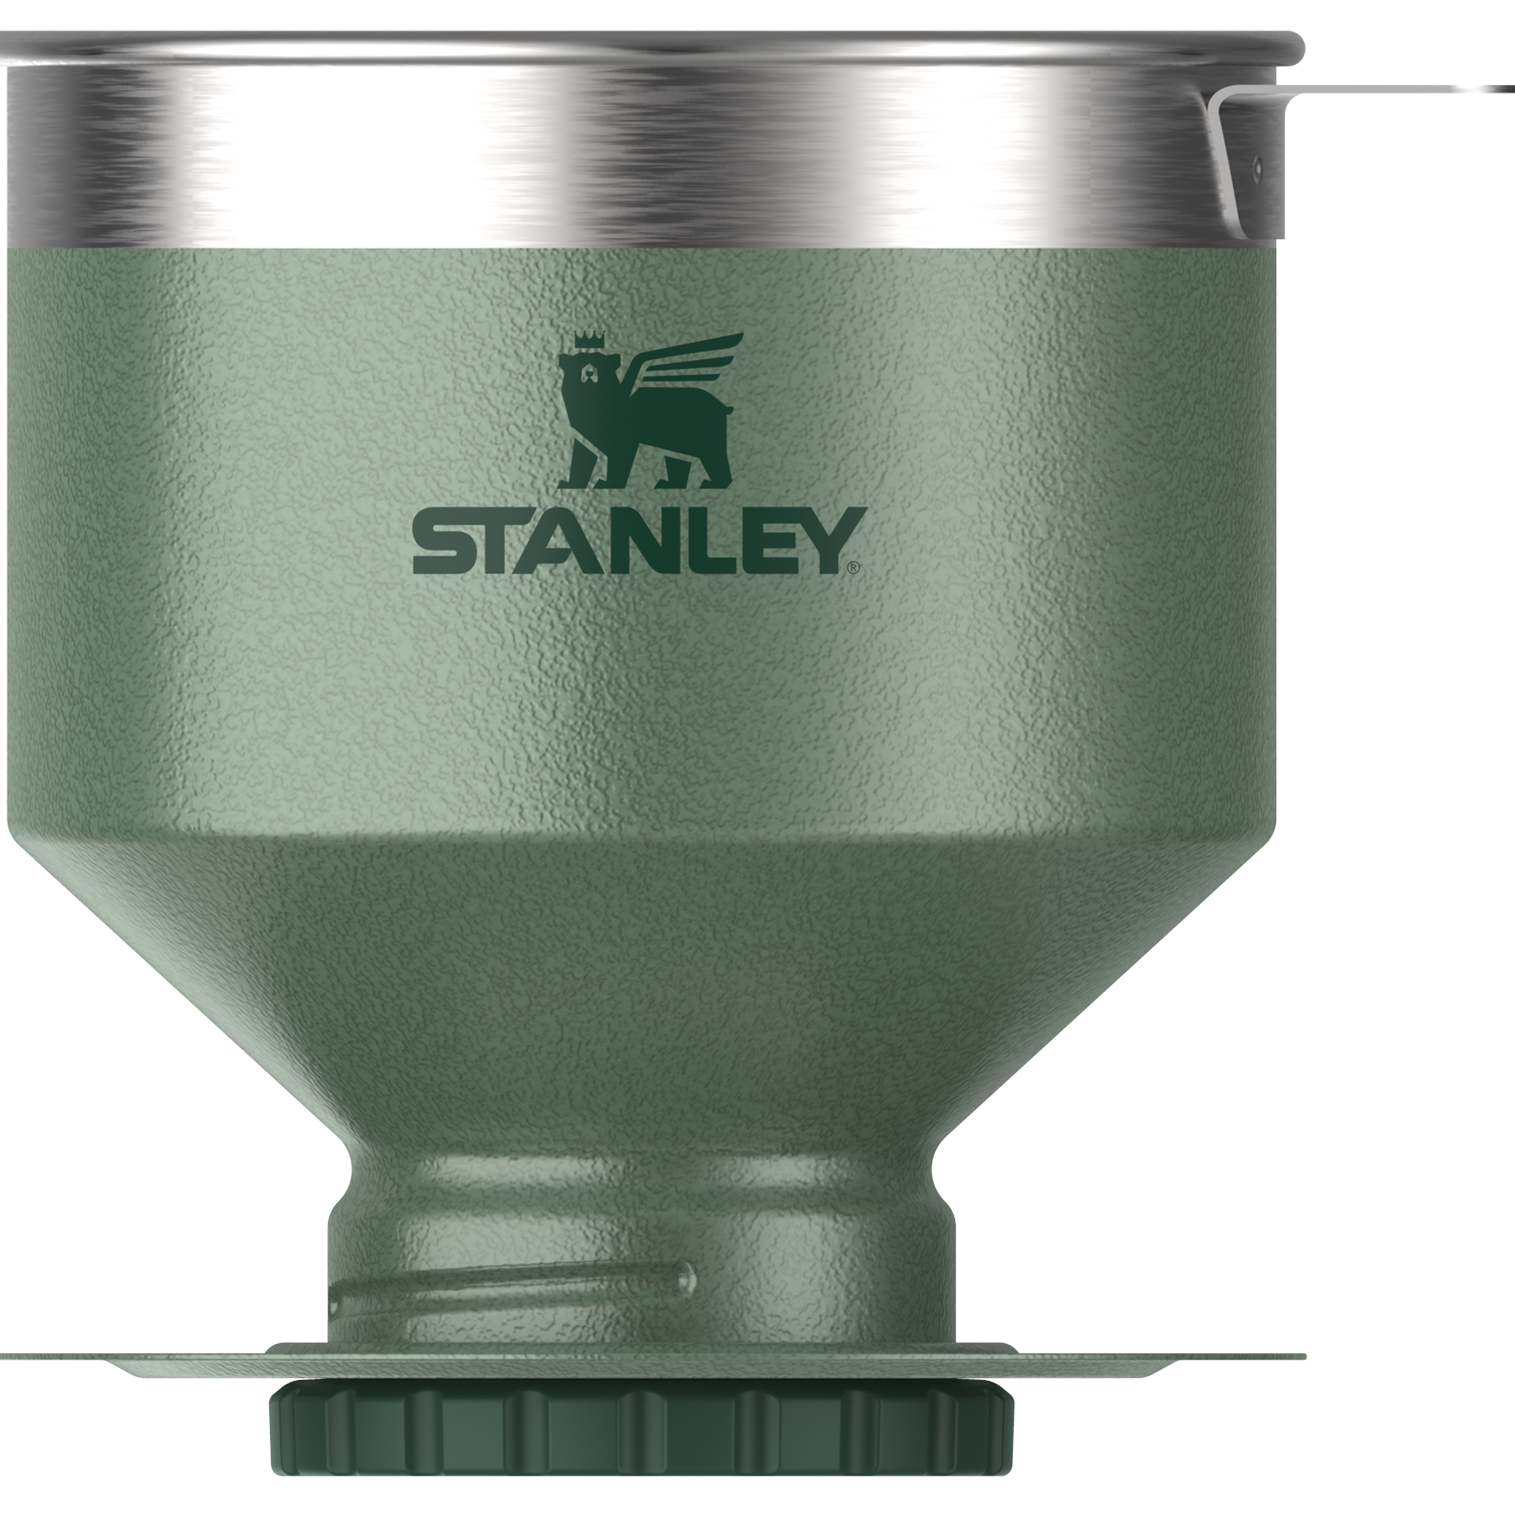 Stanley Classic Perfect-Brew Pour Over